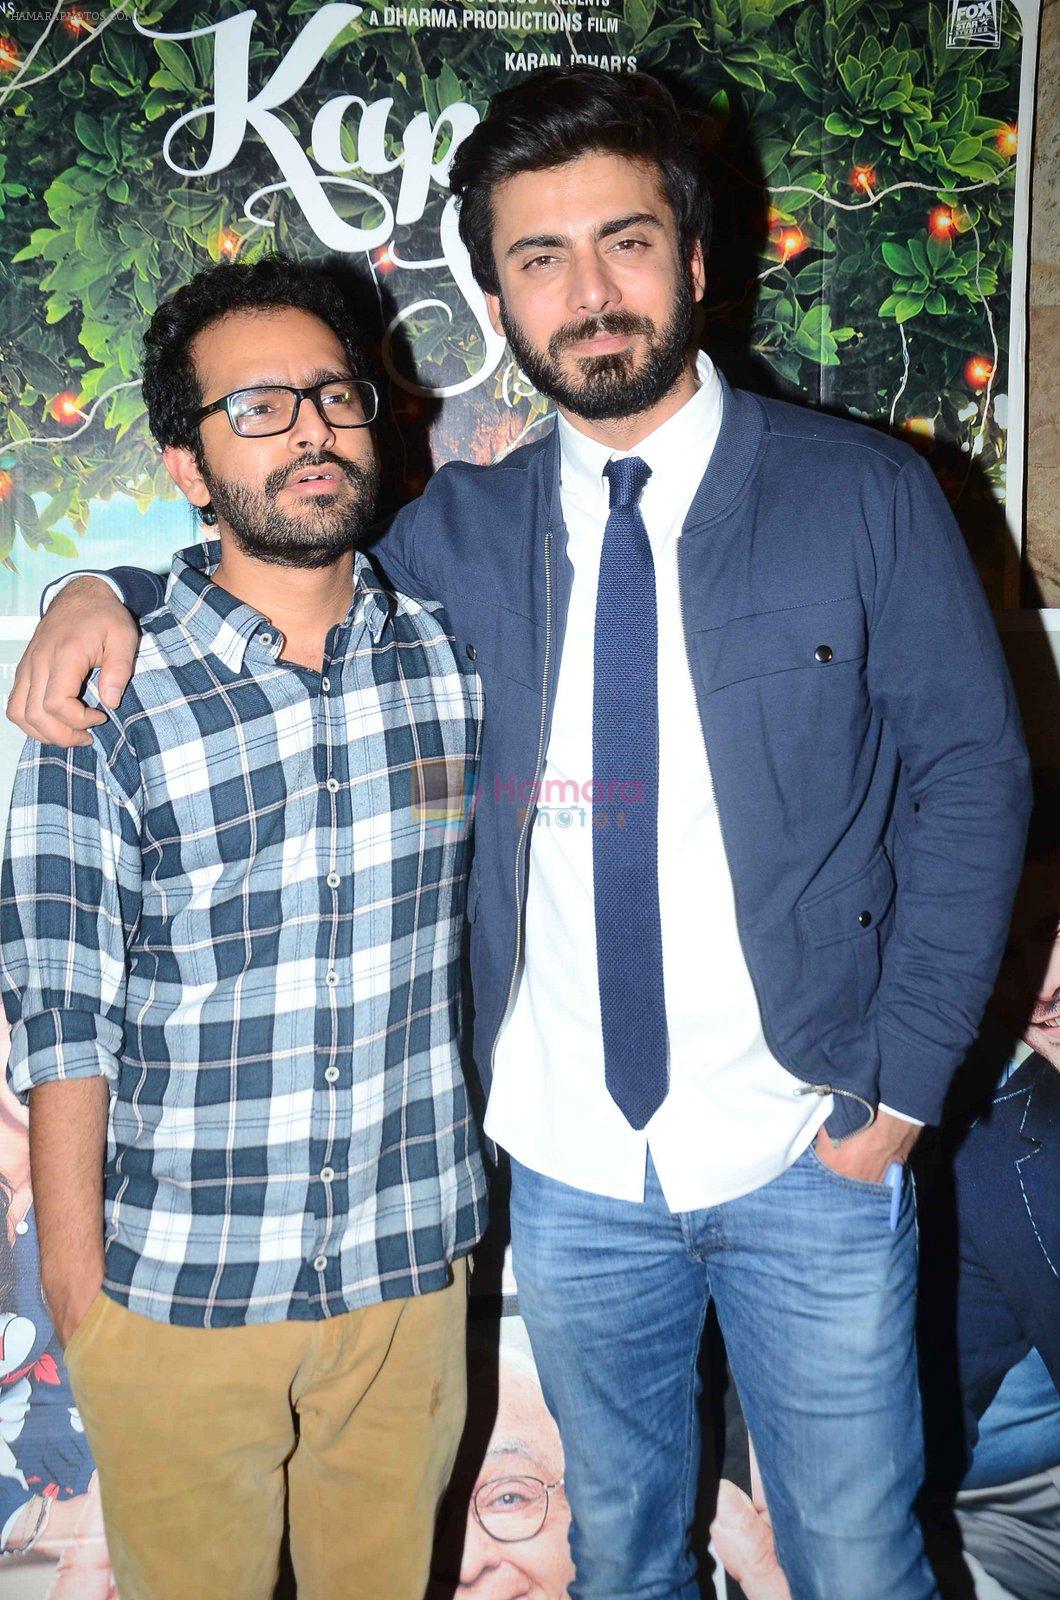 Fawad Khan at the sreening of Kapoor N Sons in Lightbox on 17th March 2016